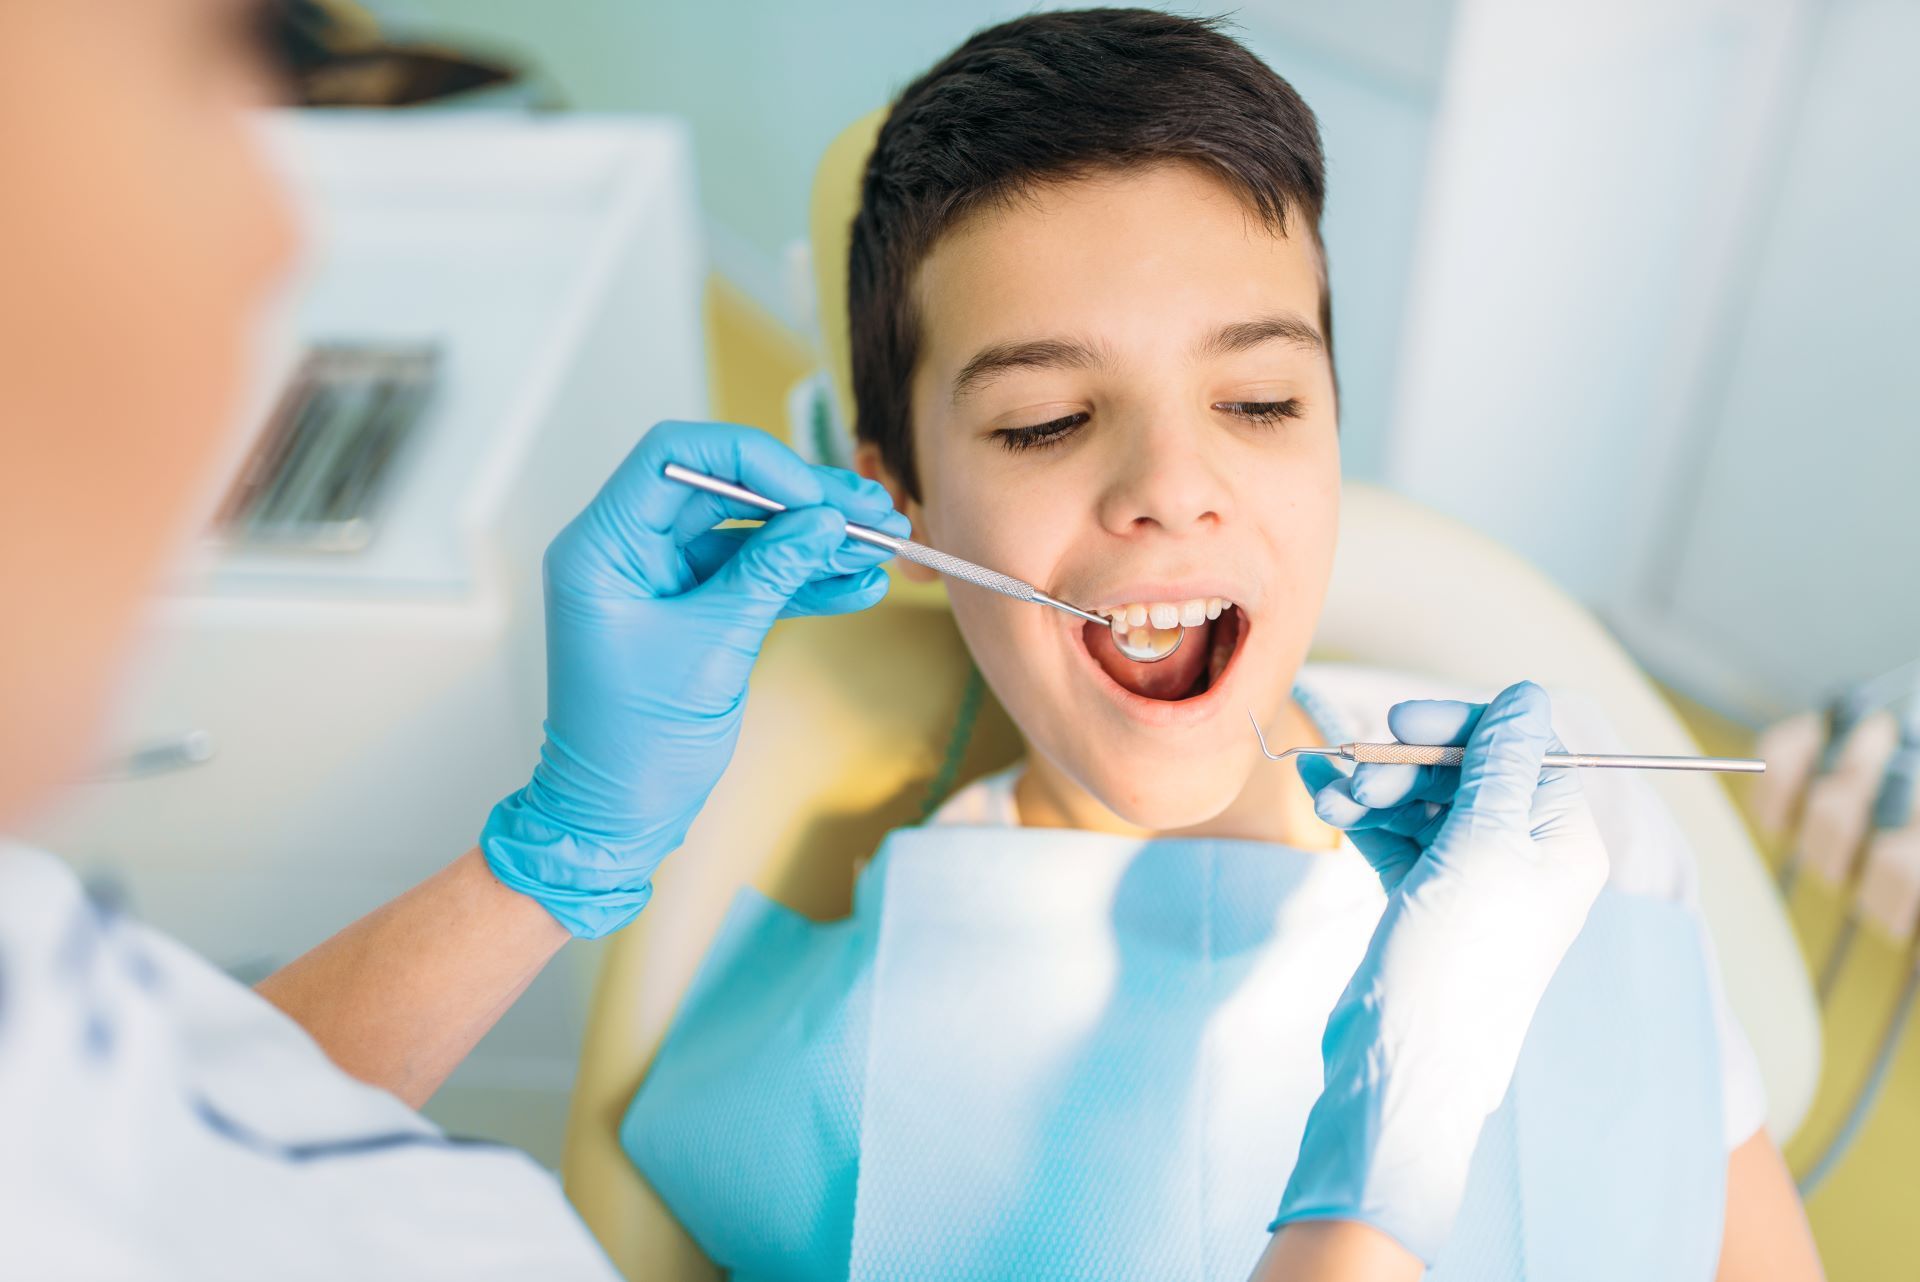 Boy in dental chair with dentist looking in mouth